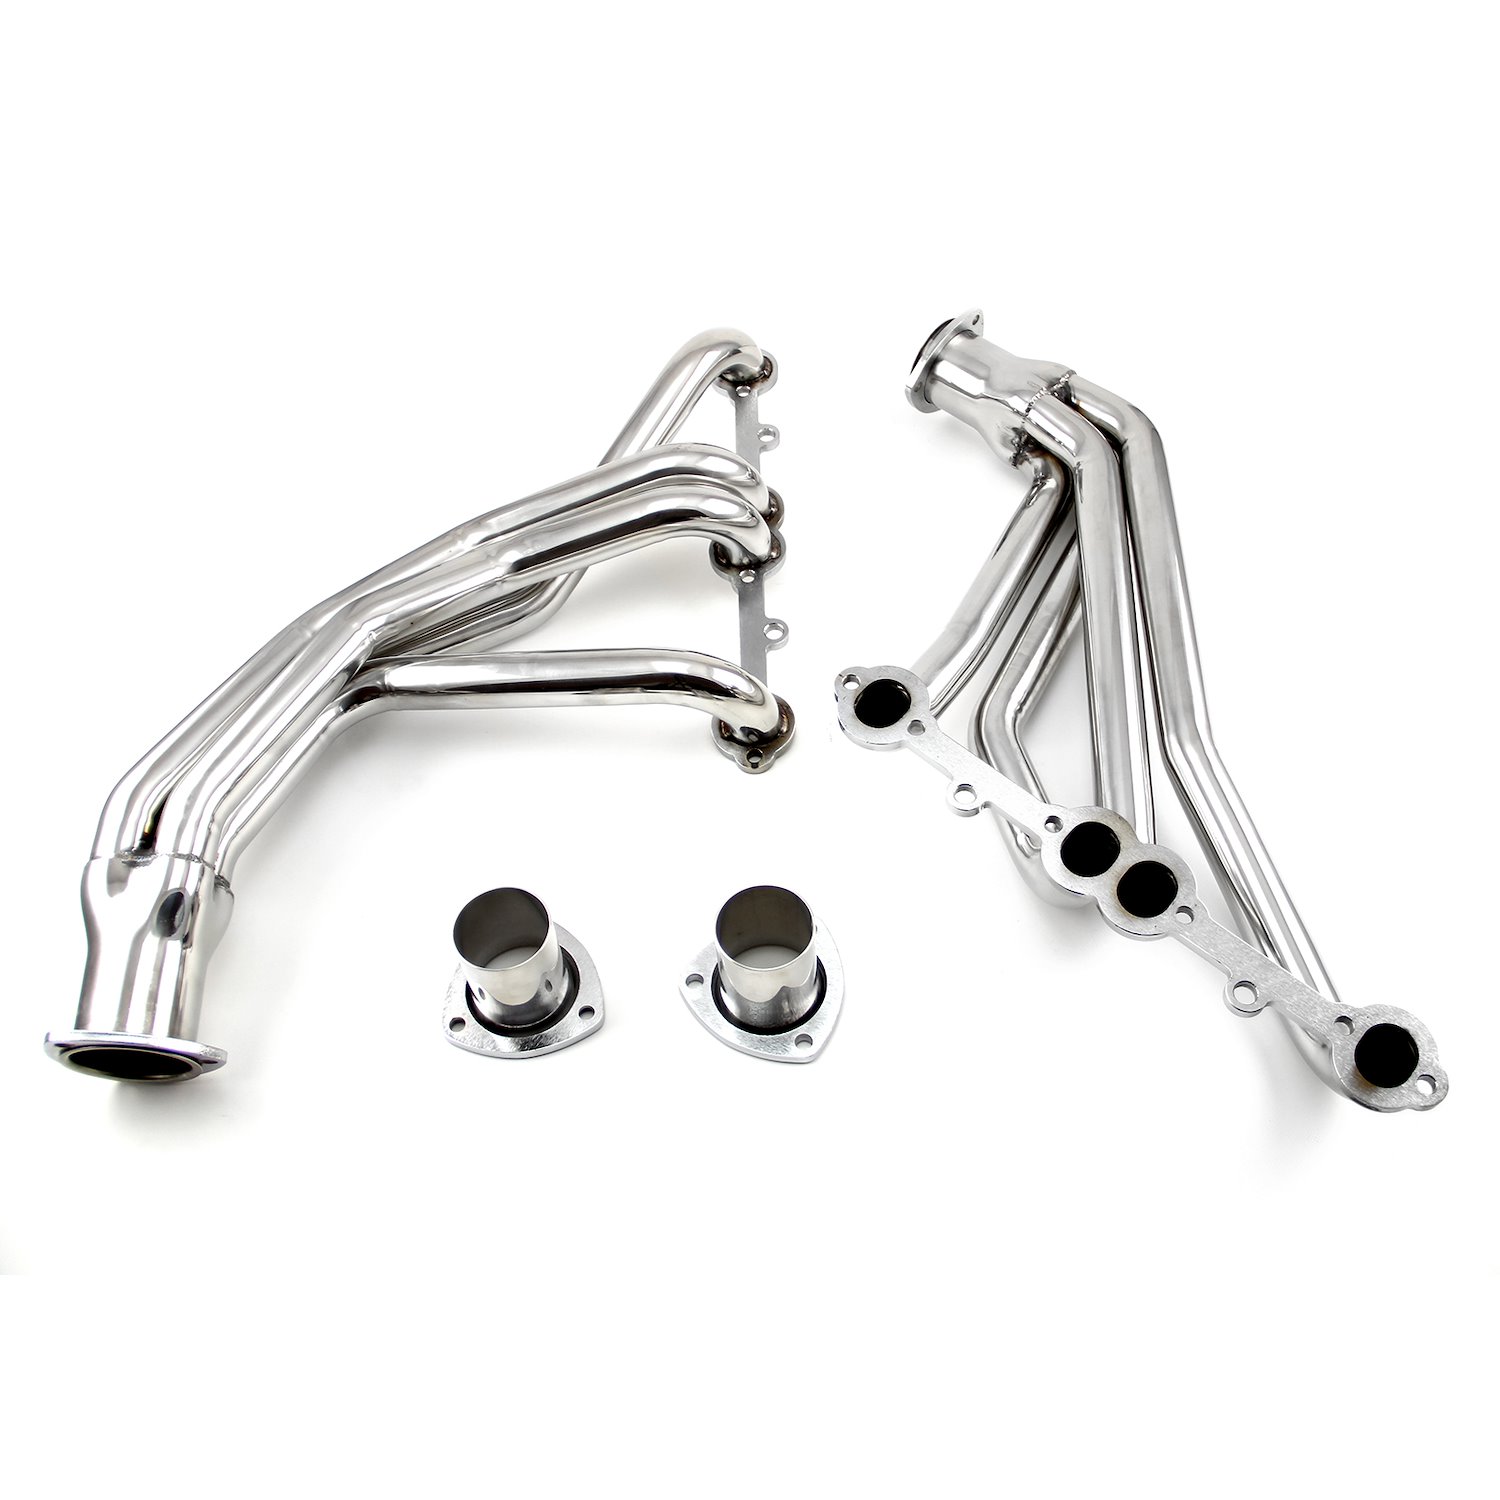 Mid-Length Exhaust Headers 1966-1987 GM Pickup Truck Small Block 350